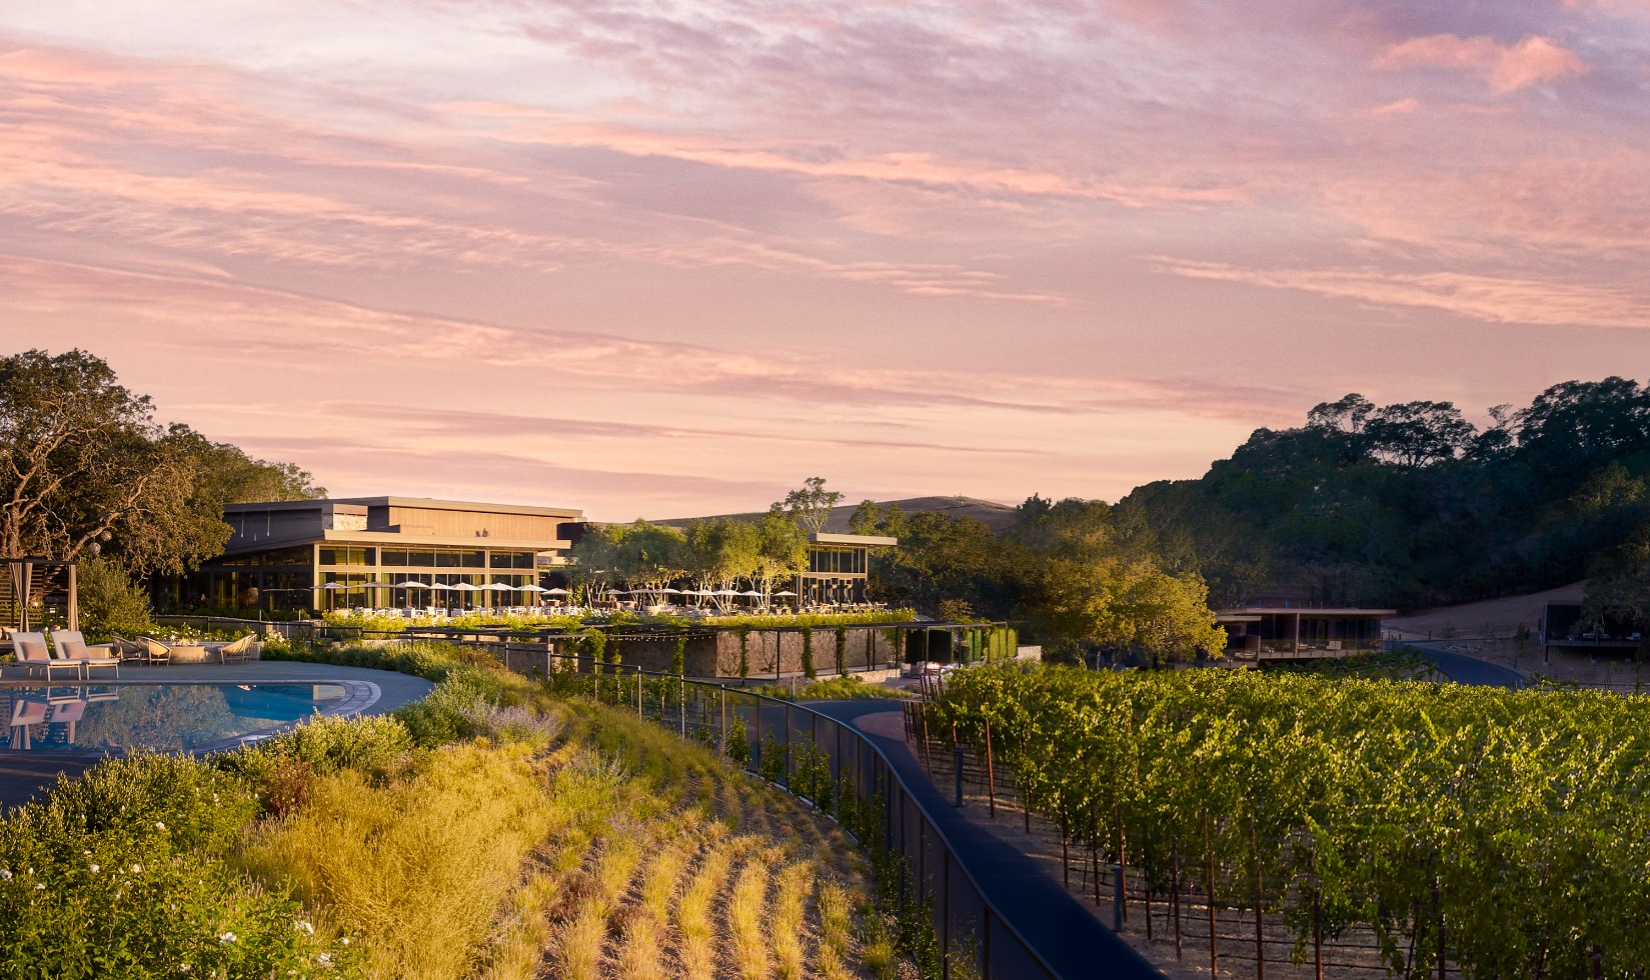 Exterior of resort with outdoor pool and lounge area overlooking vineyards. 